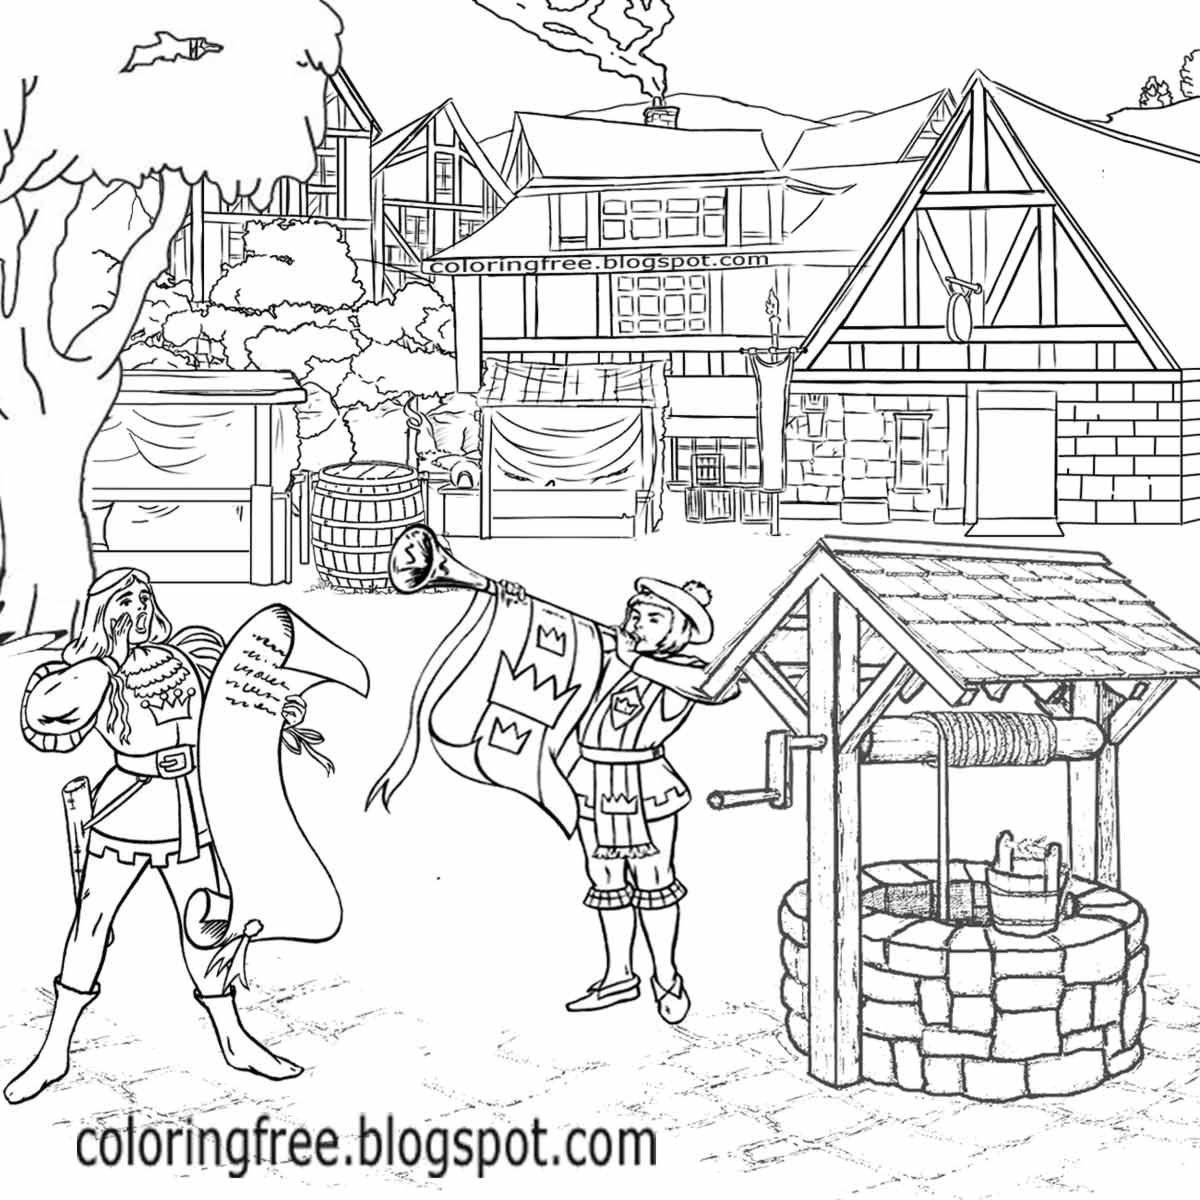 Free Coloring Pages Printable Pictures To Color Kids Drawing ideas: Dark Ages Medieval coloring ...